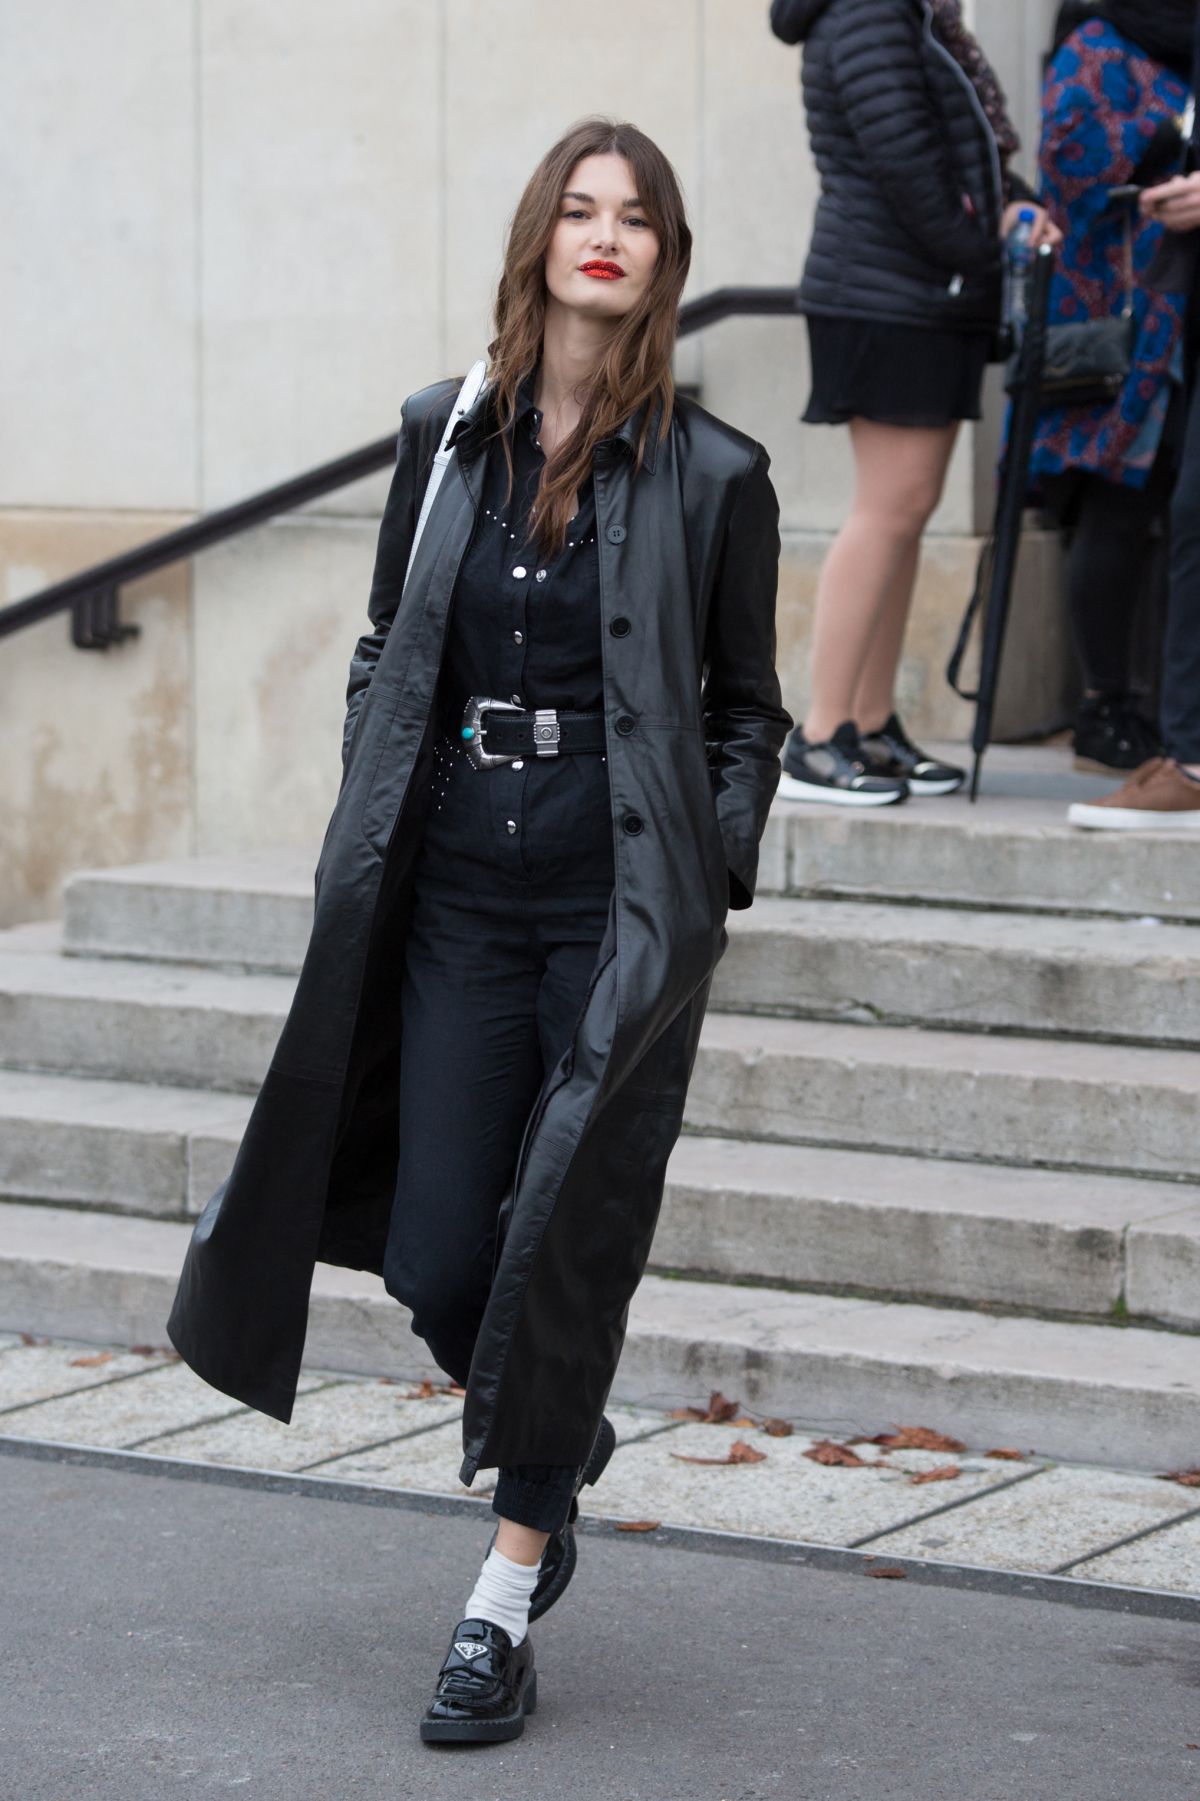 OPHELIE GUILLERMAND Leaves L’Oreal Show at Paris Fashion Week 10/03 ...